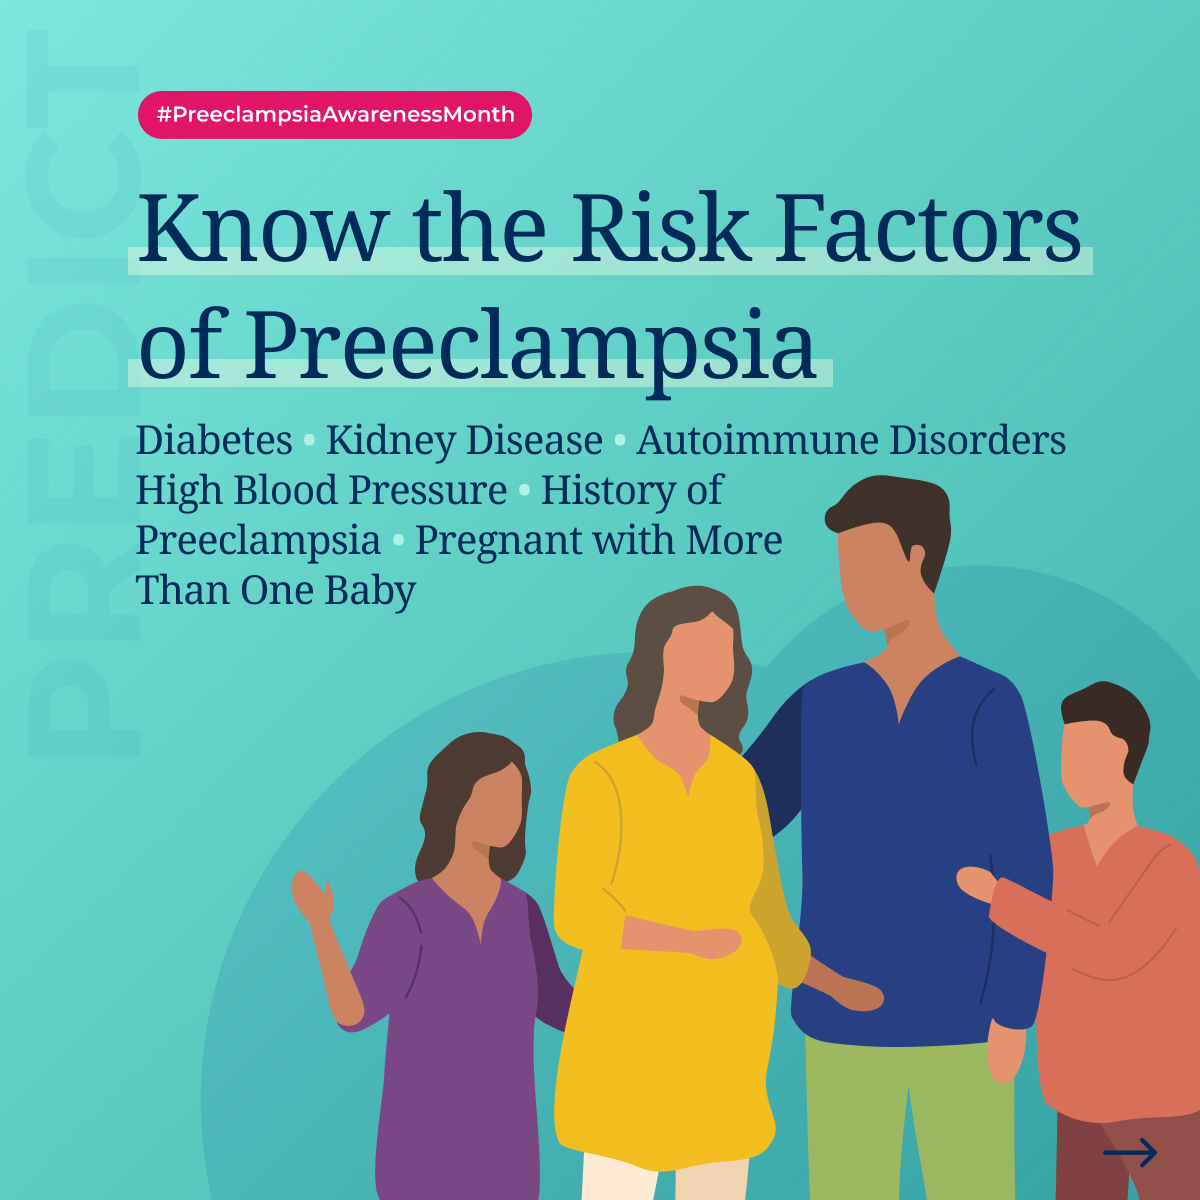 Know the symptoms of preeclampsia: severe headache, swelling in the hands and face, visual issues, nausea and vomiting, stomach or abdomen pain, and/or sudden weight gain. Preeclampsia can occur in any pregnancy, so ALL moms need to know. #PreeclampsiaAwarenessMonth @preeclampsia